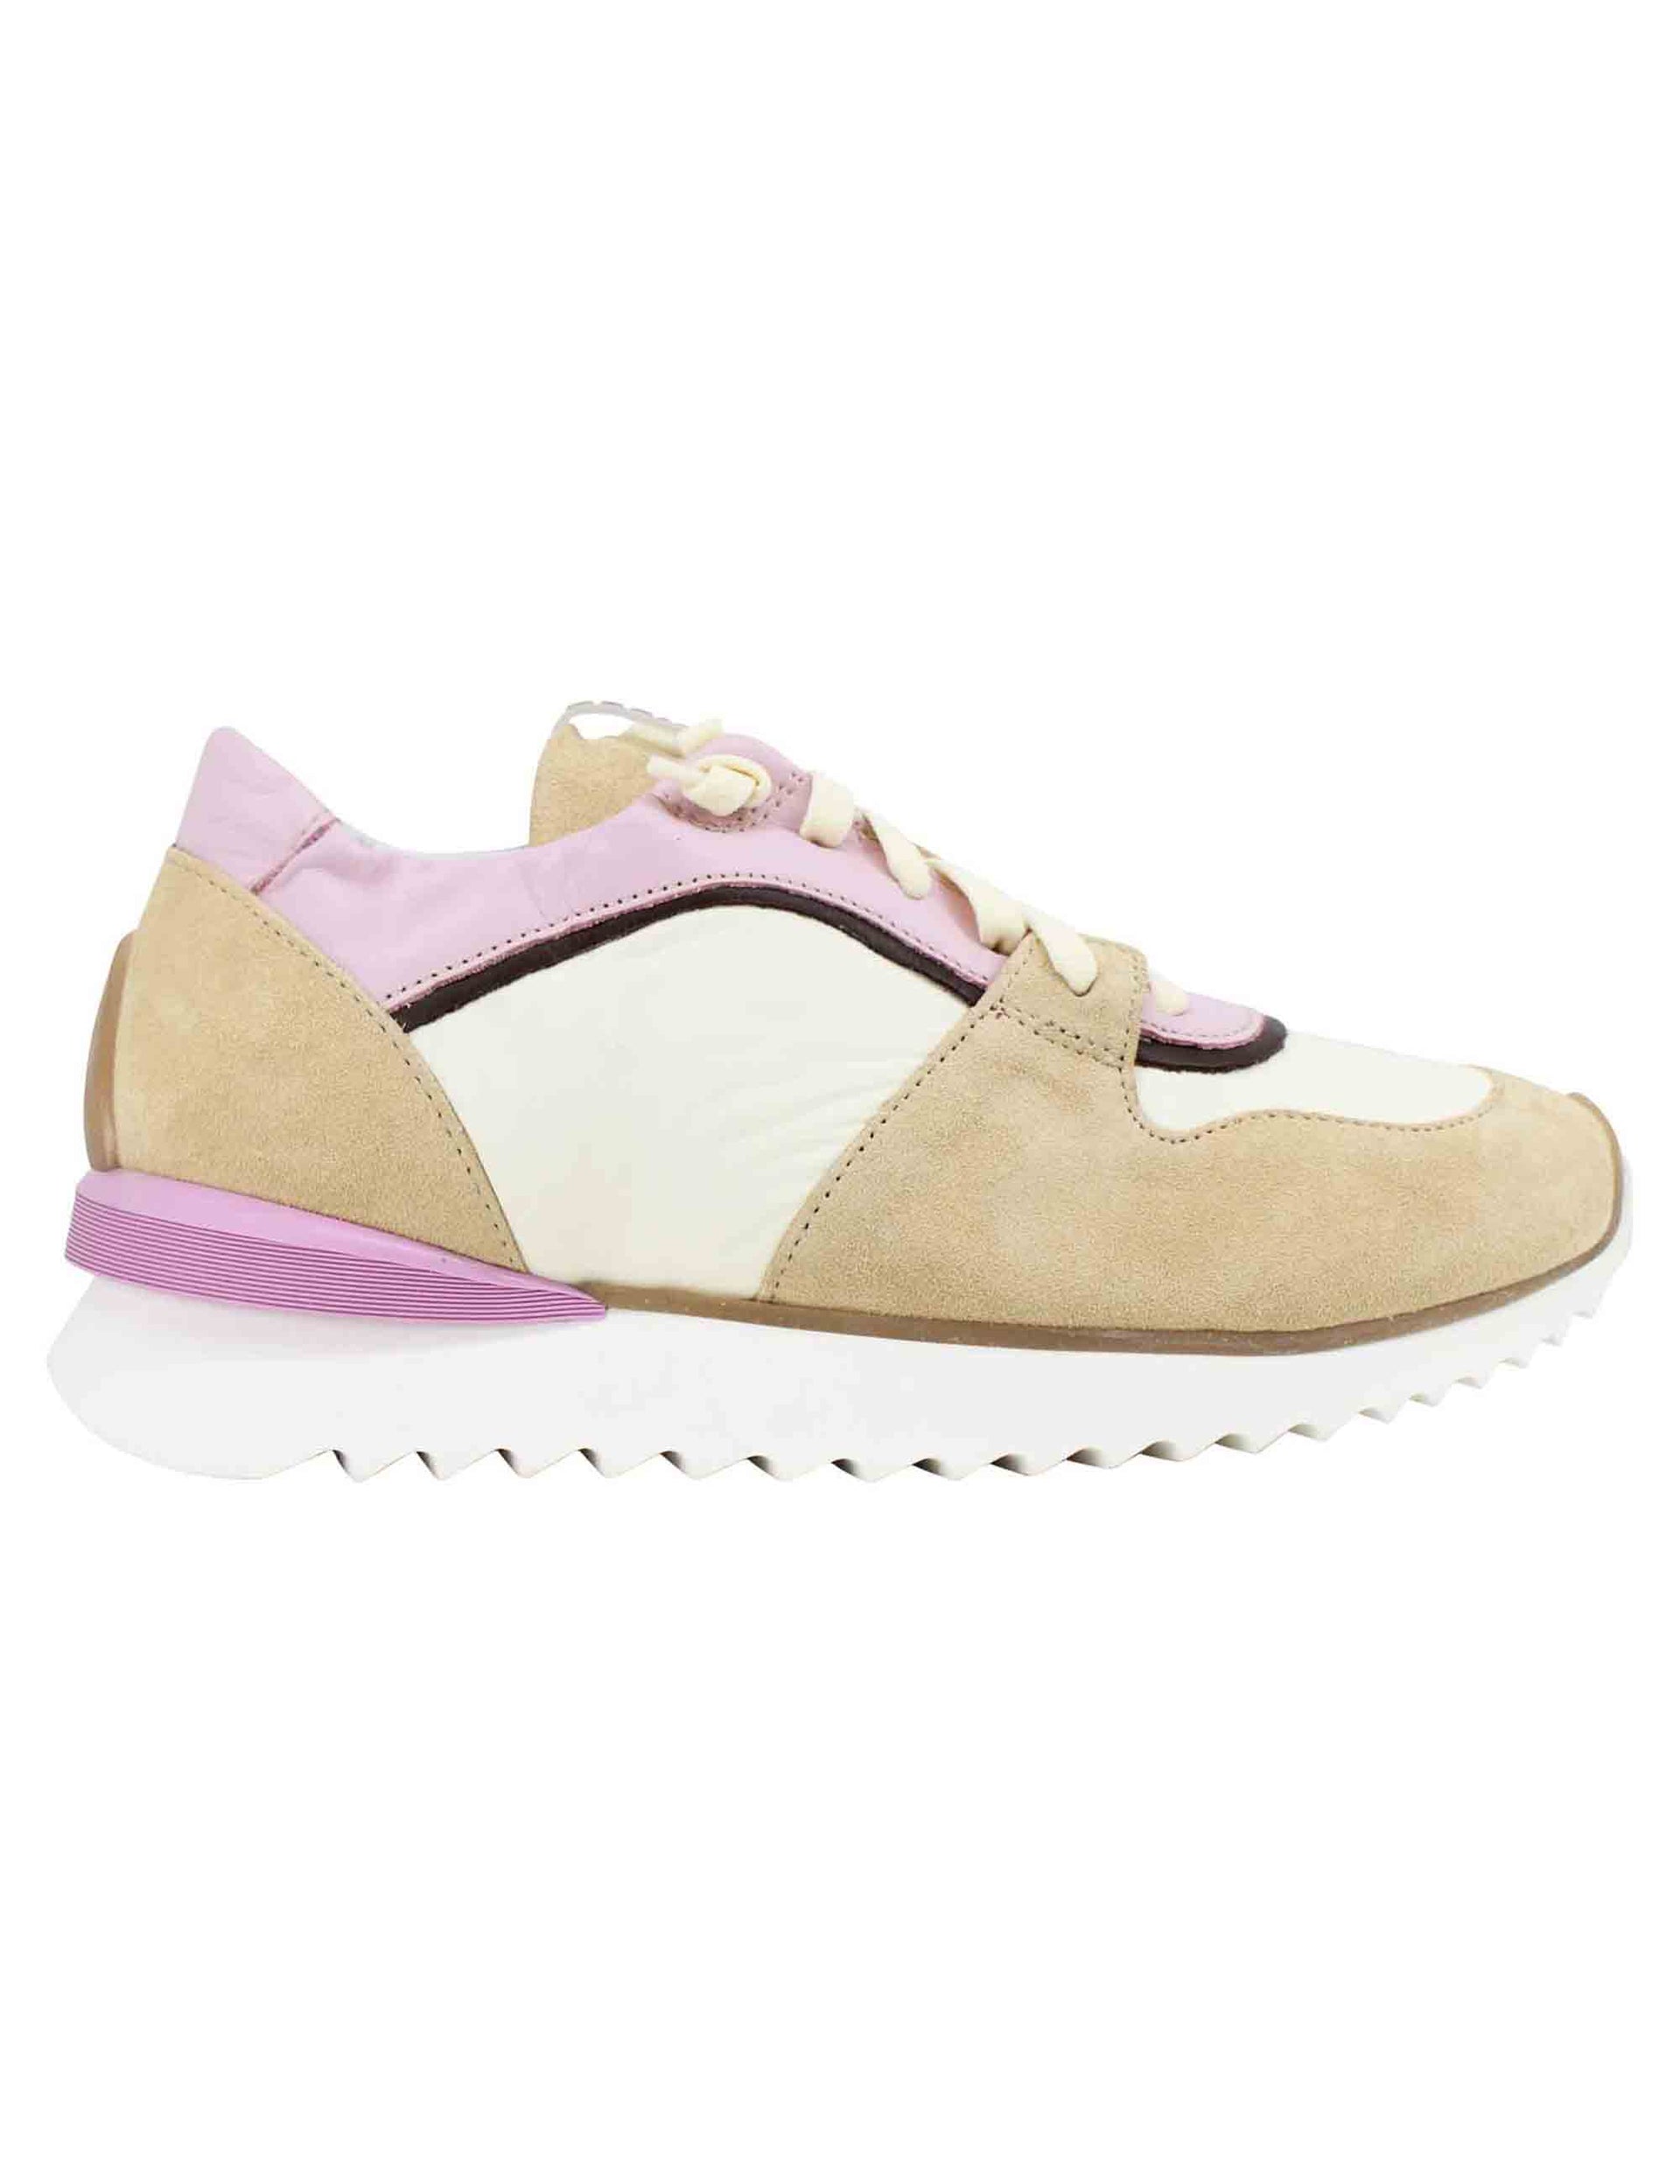 Women's sneakers in beige leather and suede